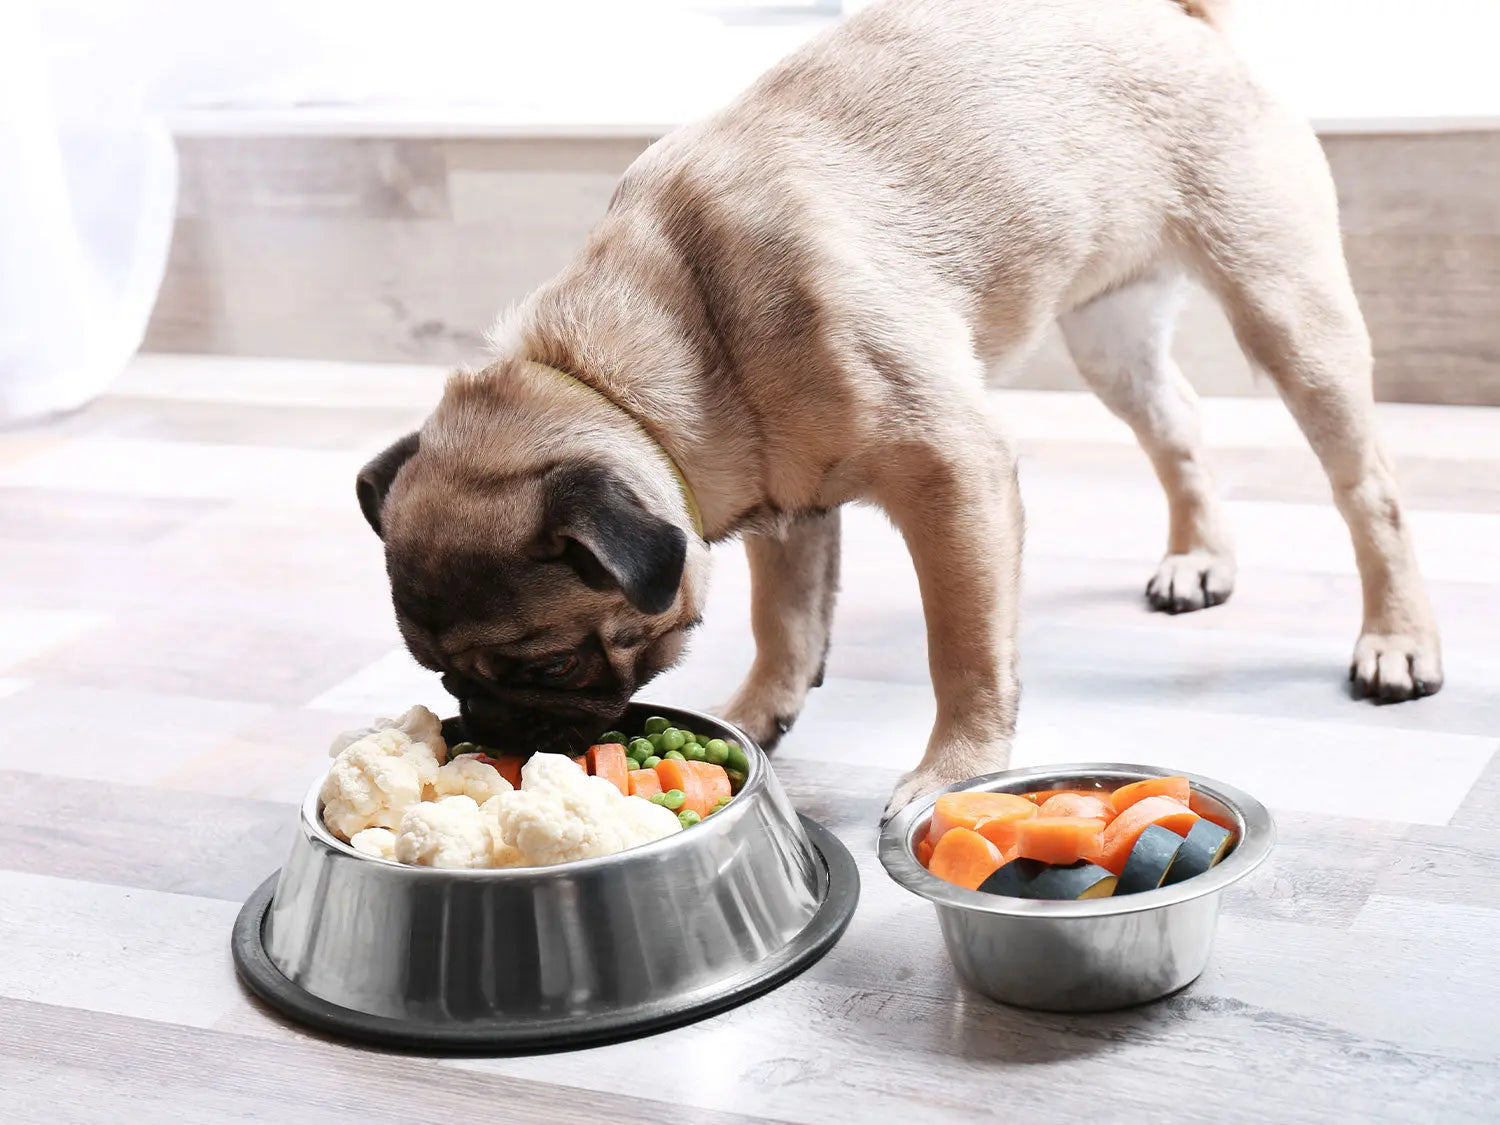 How To Ensure a Balanced Diet | Human & Pets™